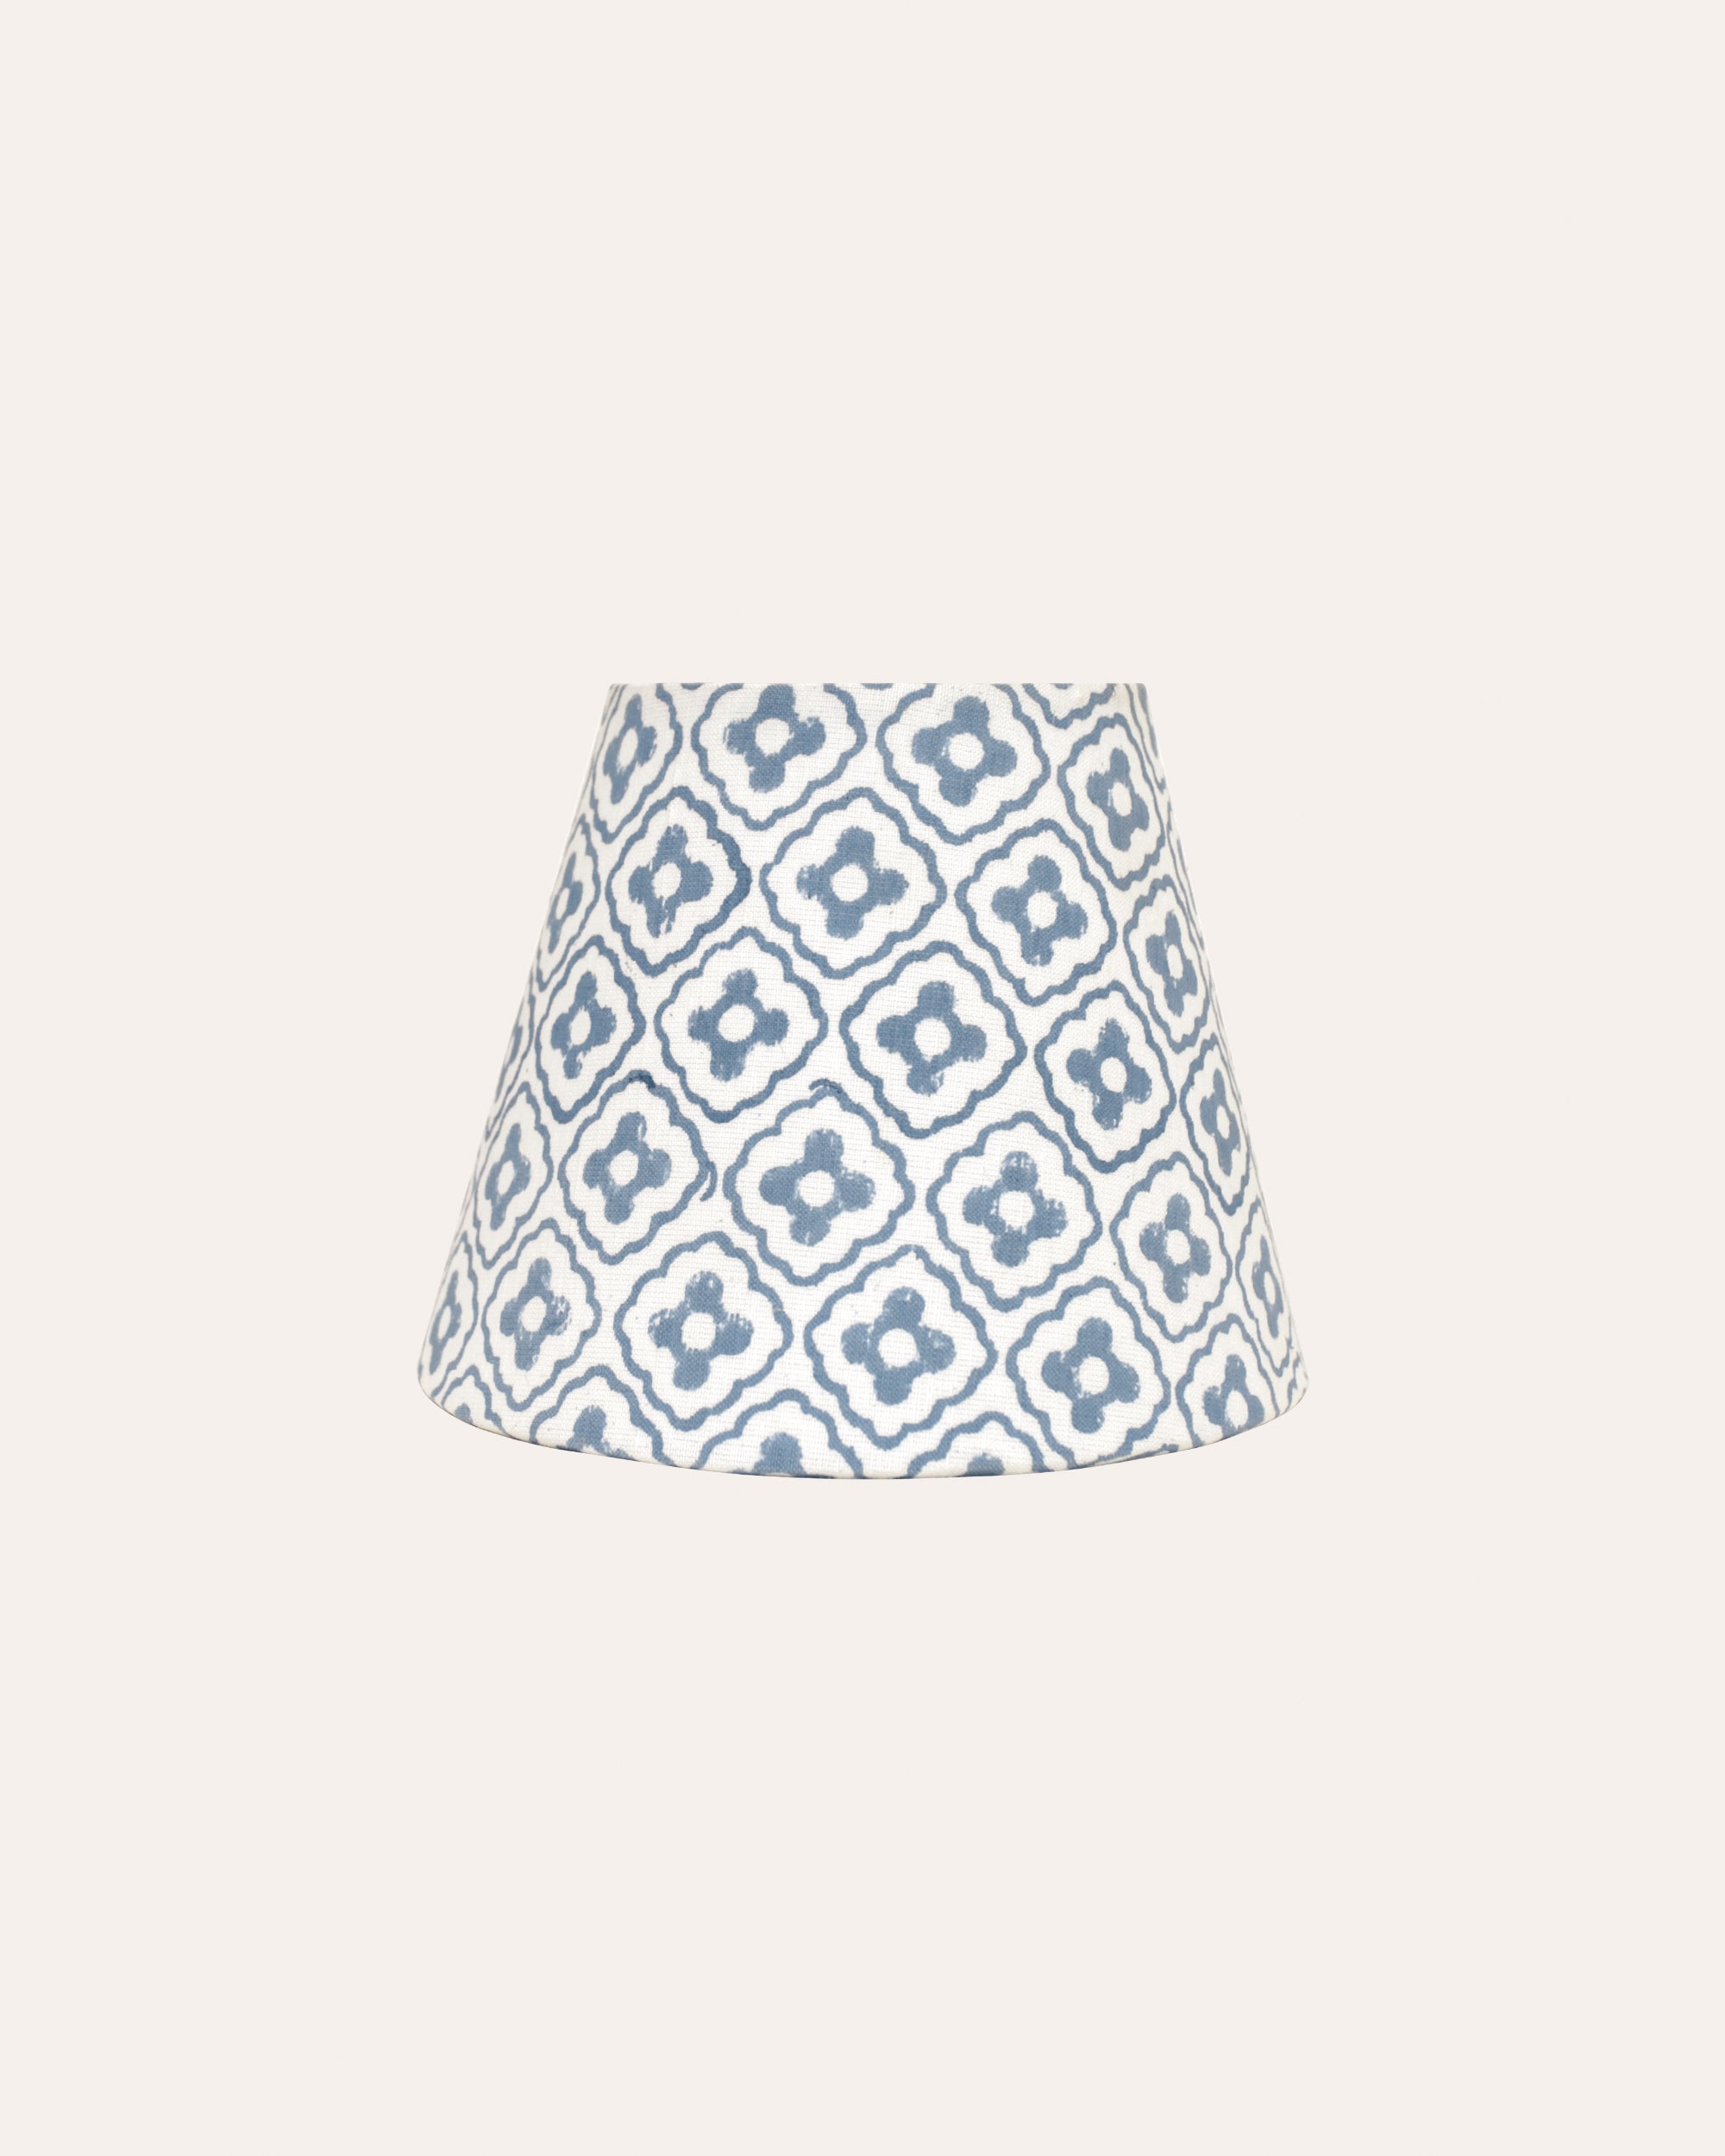 Finestra Candle Lampshade - Blue